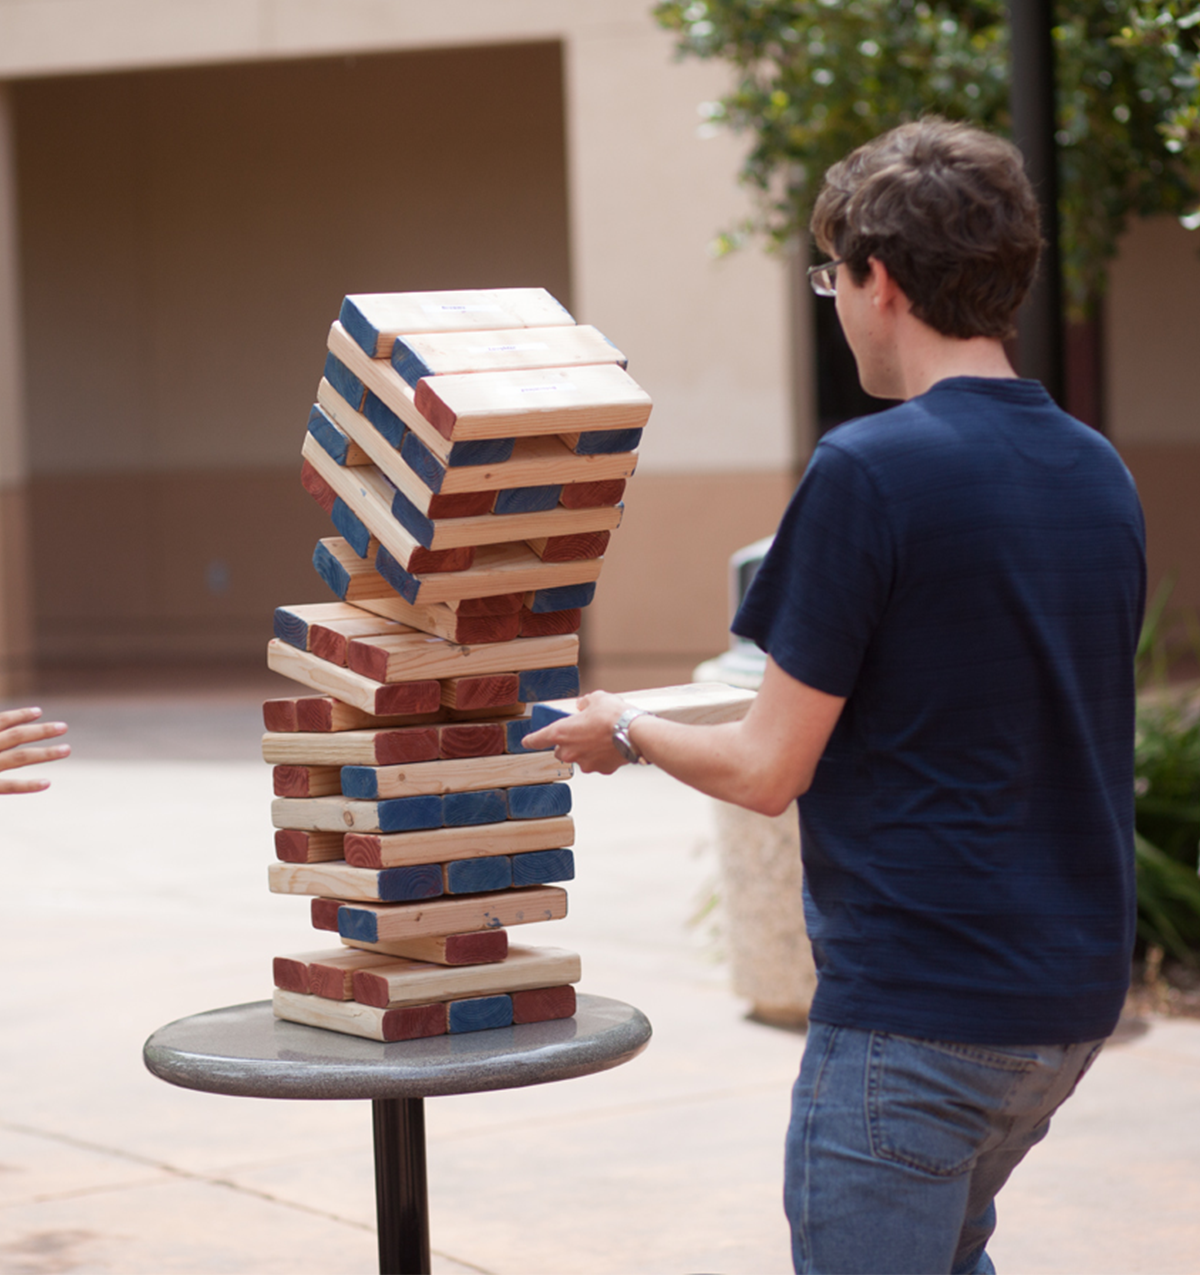 A jingo tower falling on a student